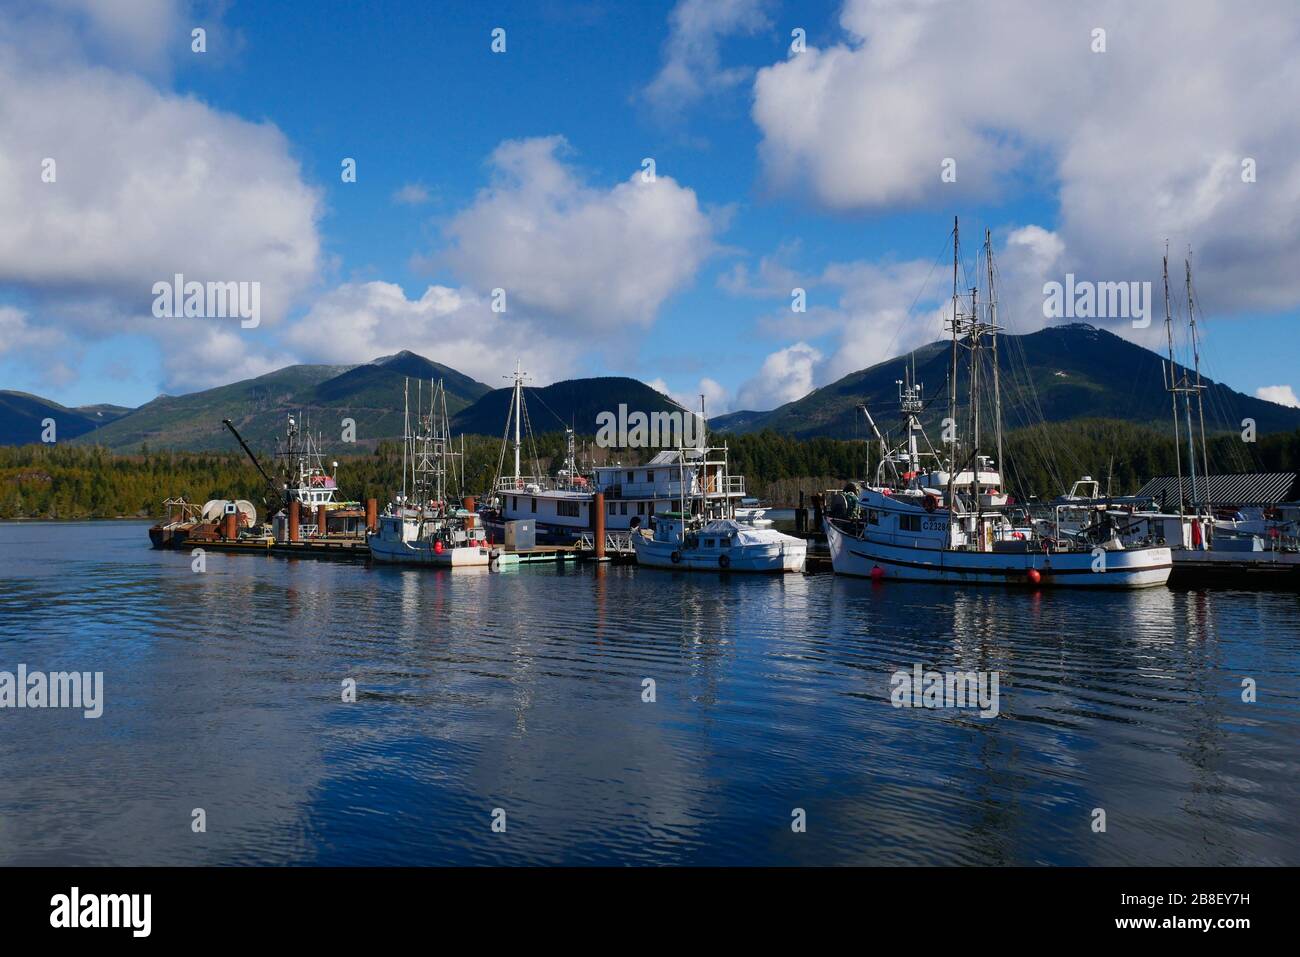 Boats moored in Ucluelet harbor with blue sky and mountain background Stock Photo